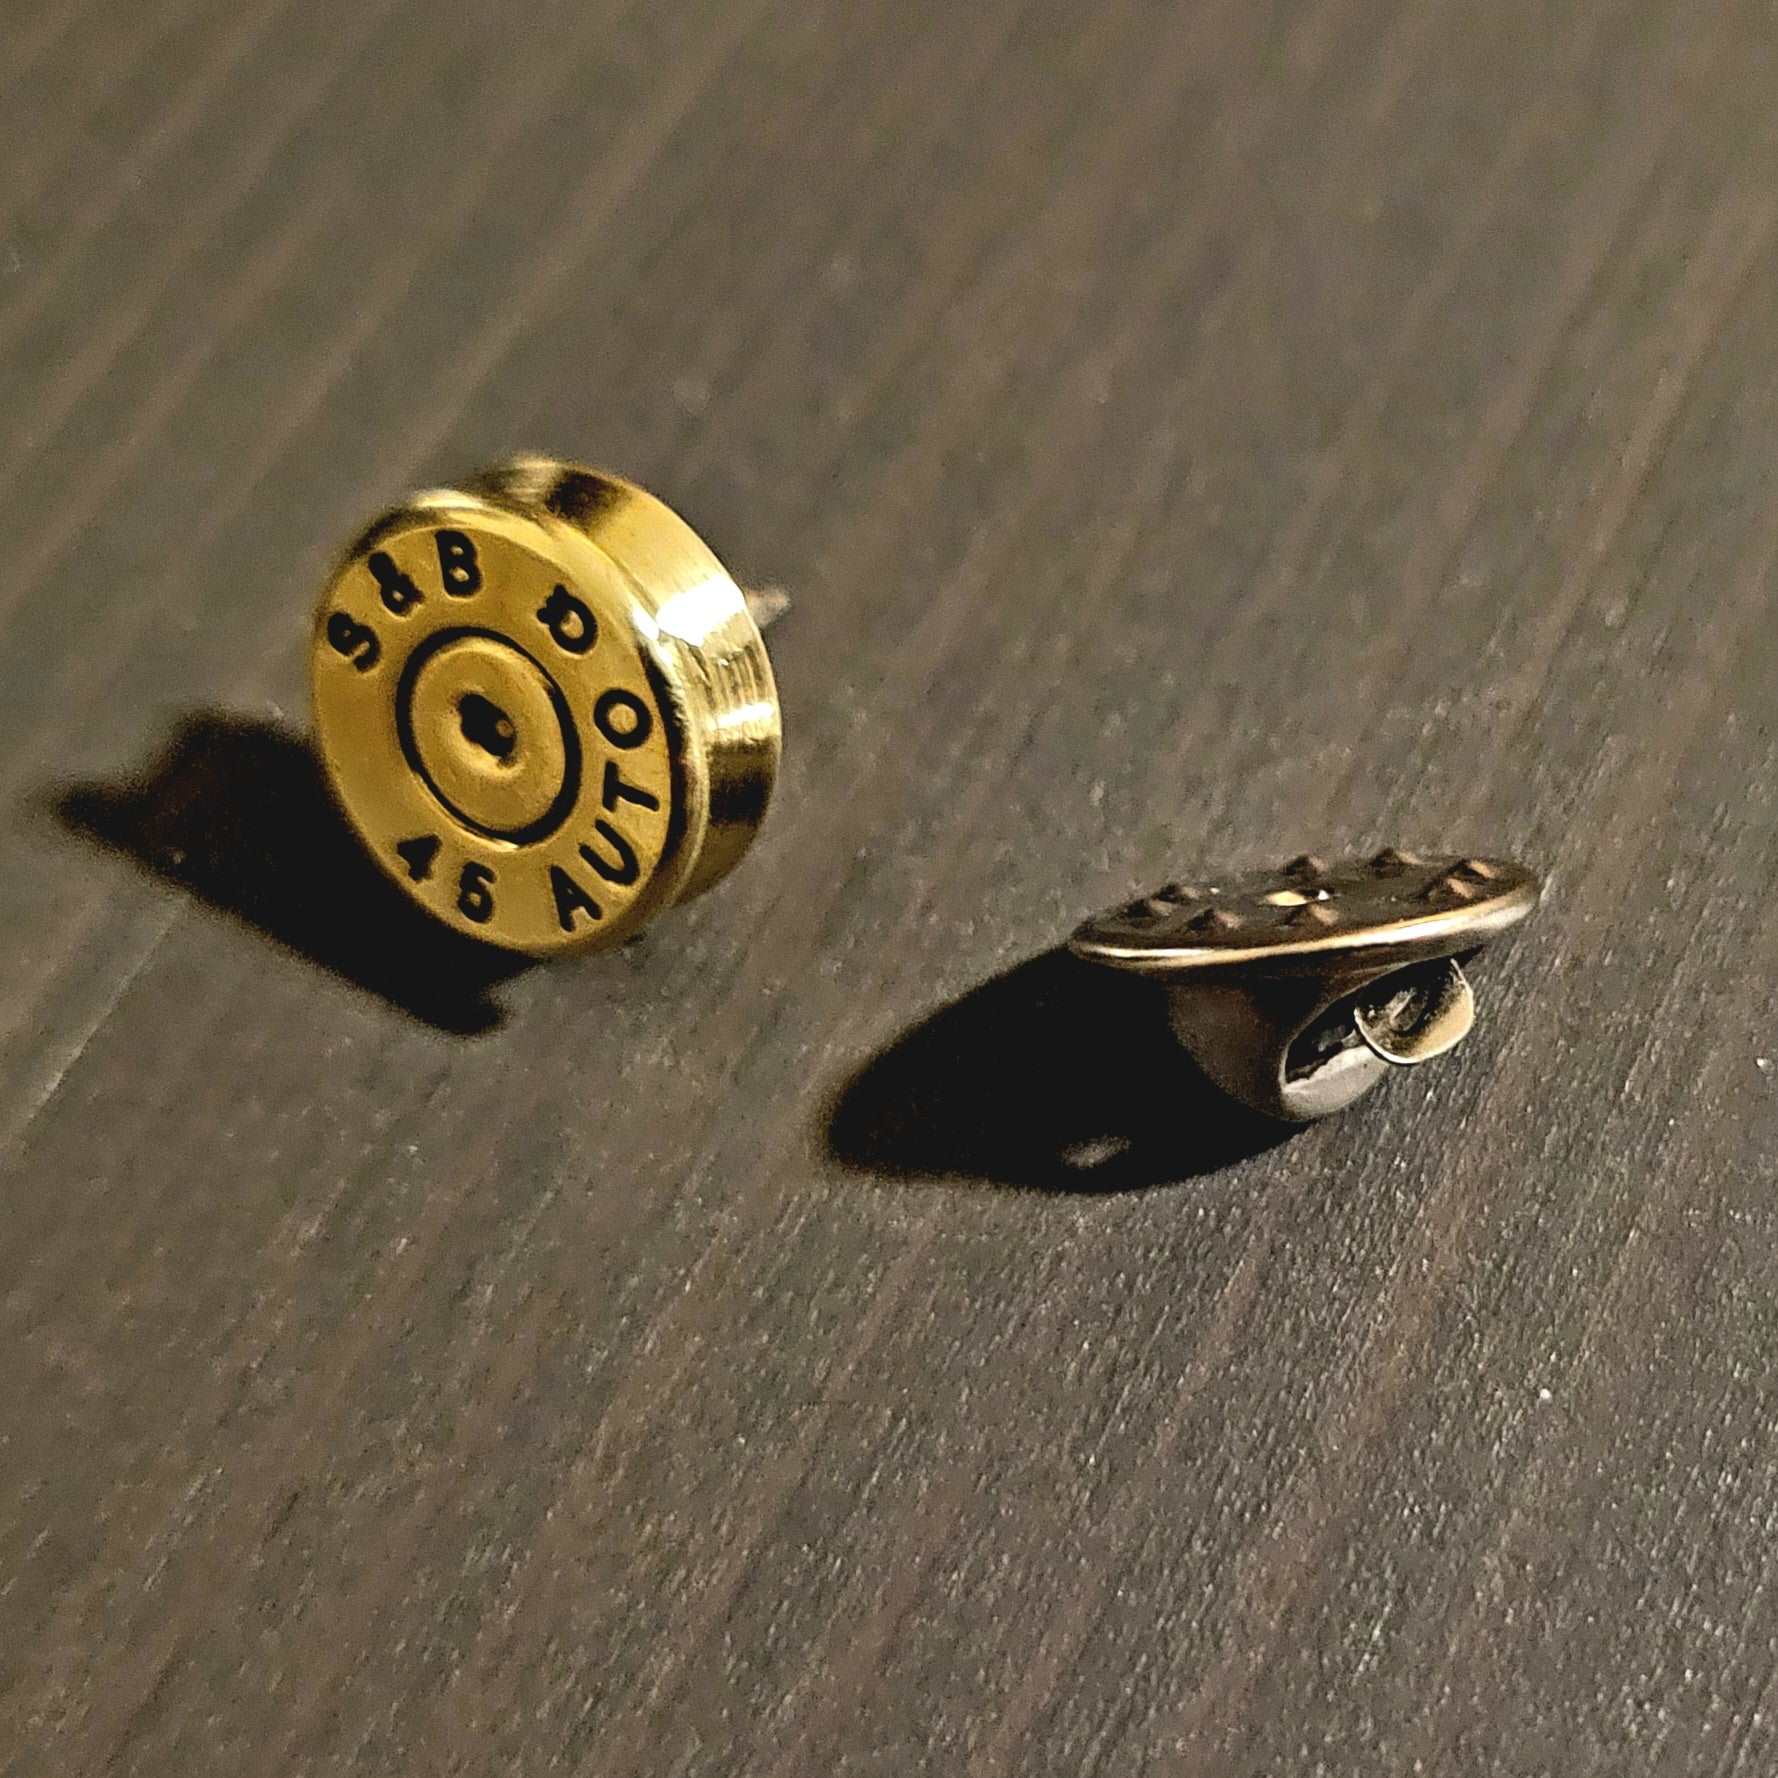 Pin on MEN'S CLOTHES